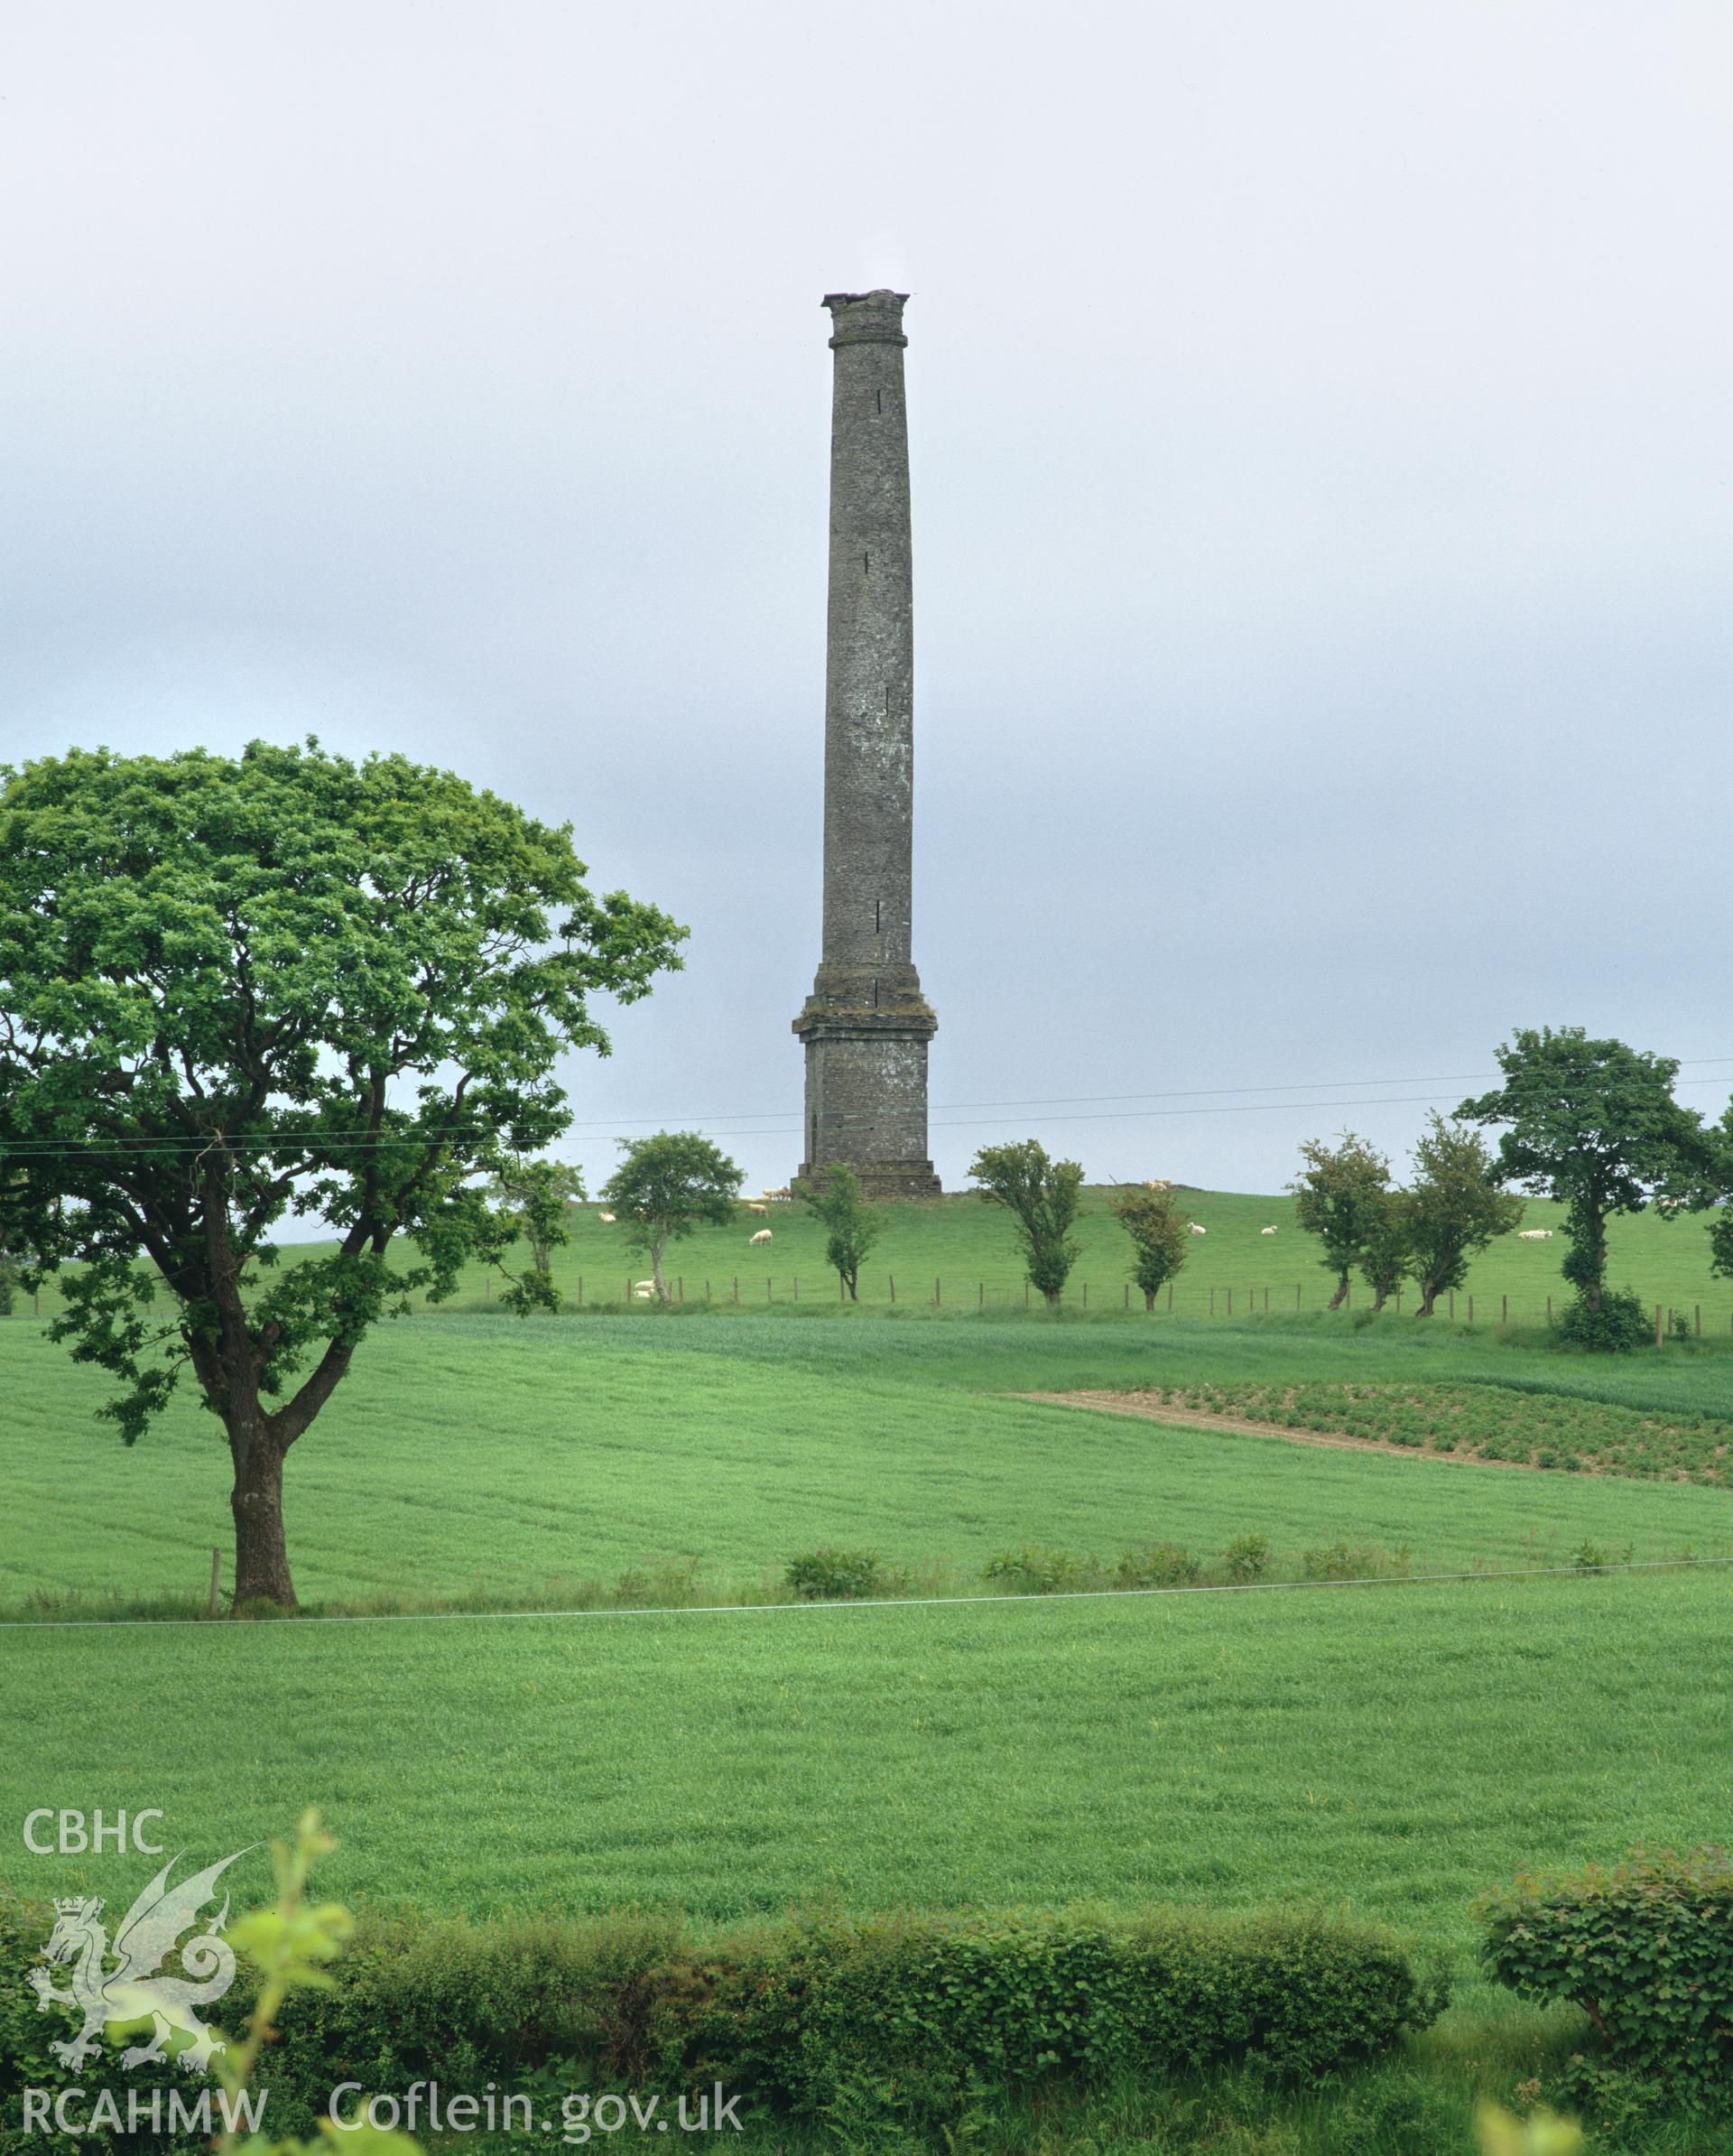 Colour transparency showing an exterior view of Derry Ormond Tower, Llangybi, produced by Iain Wright, June 2004.